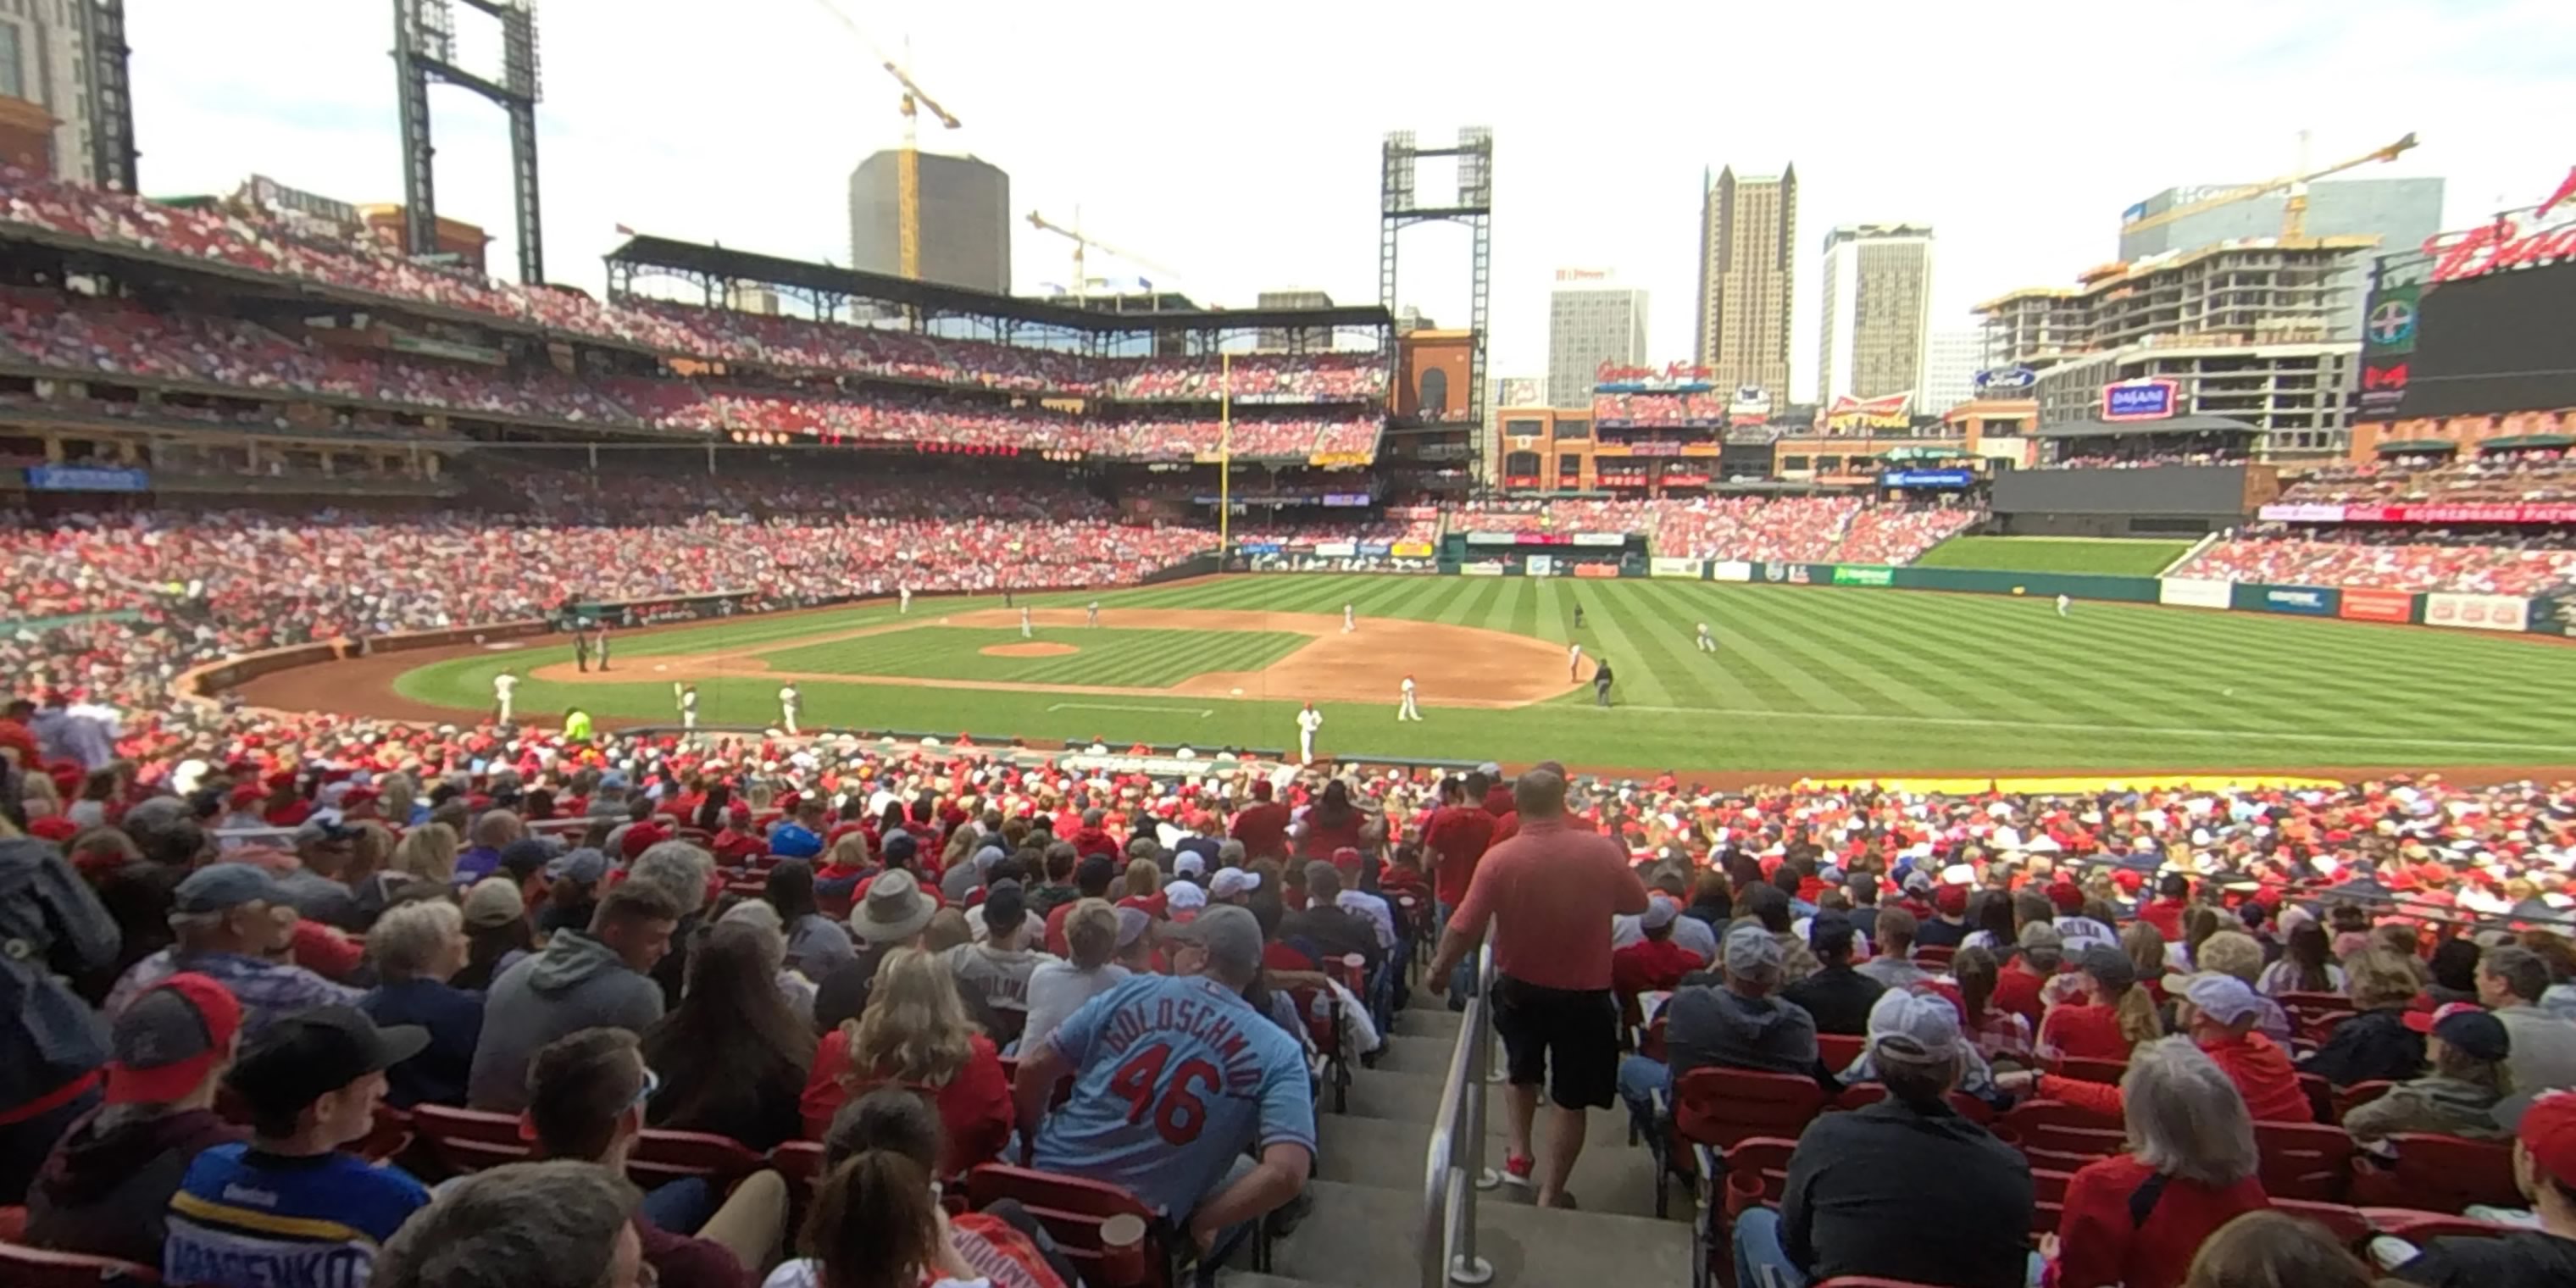 section 141 panoramic seat view  - busch stadium